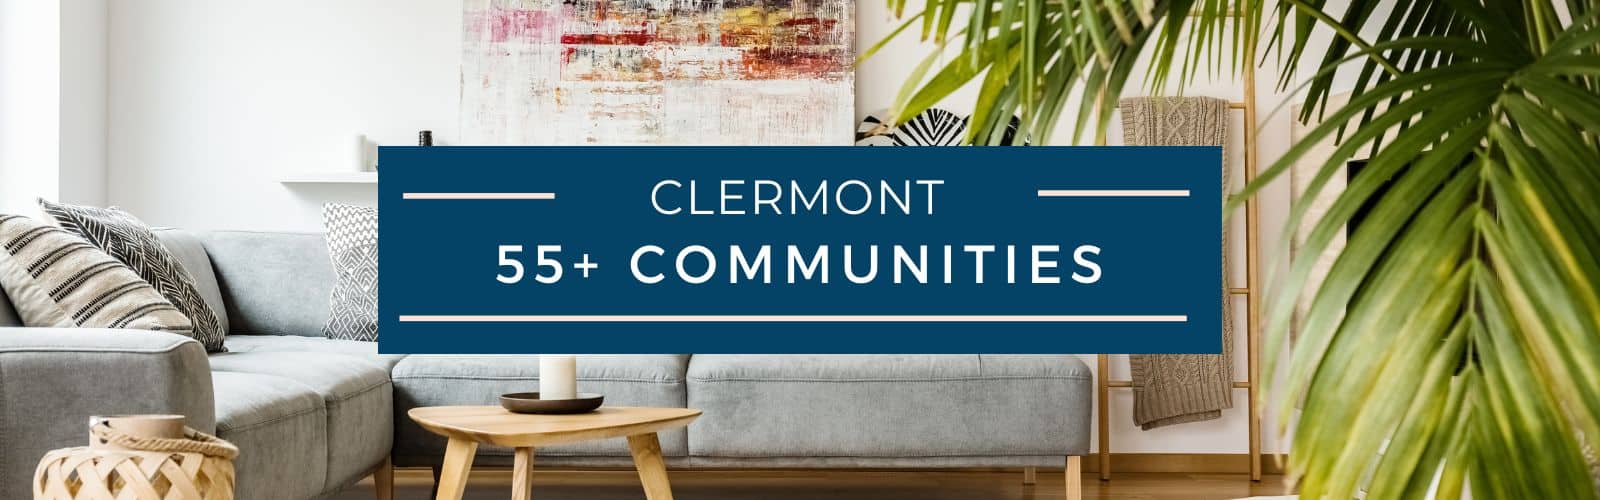 Clermont 55+ Homes for Sale